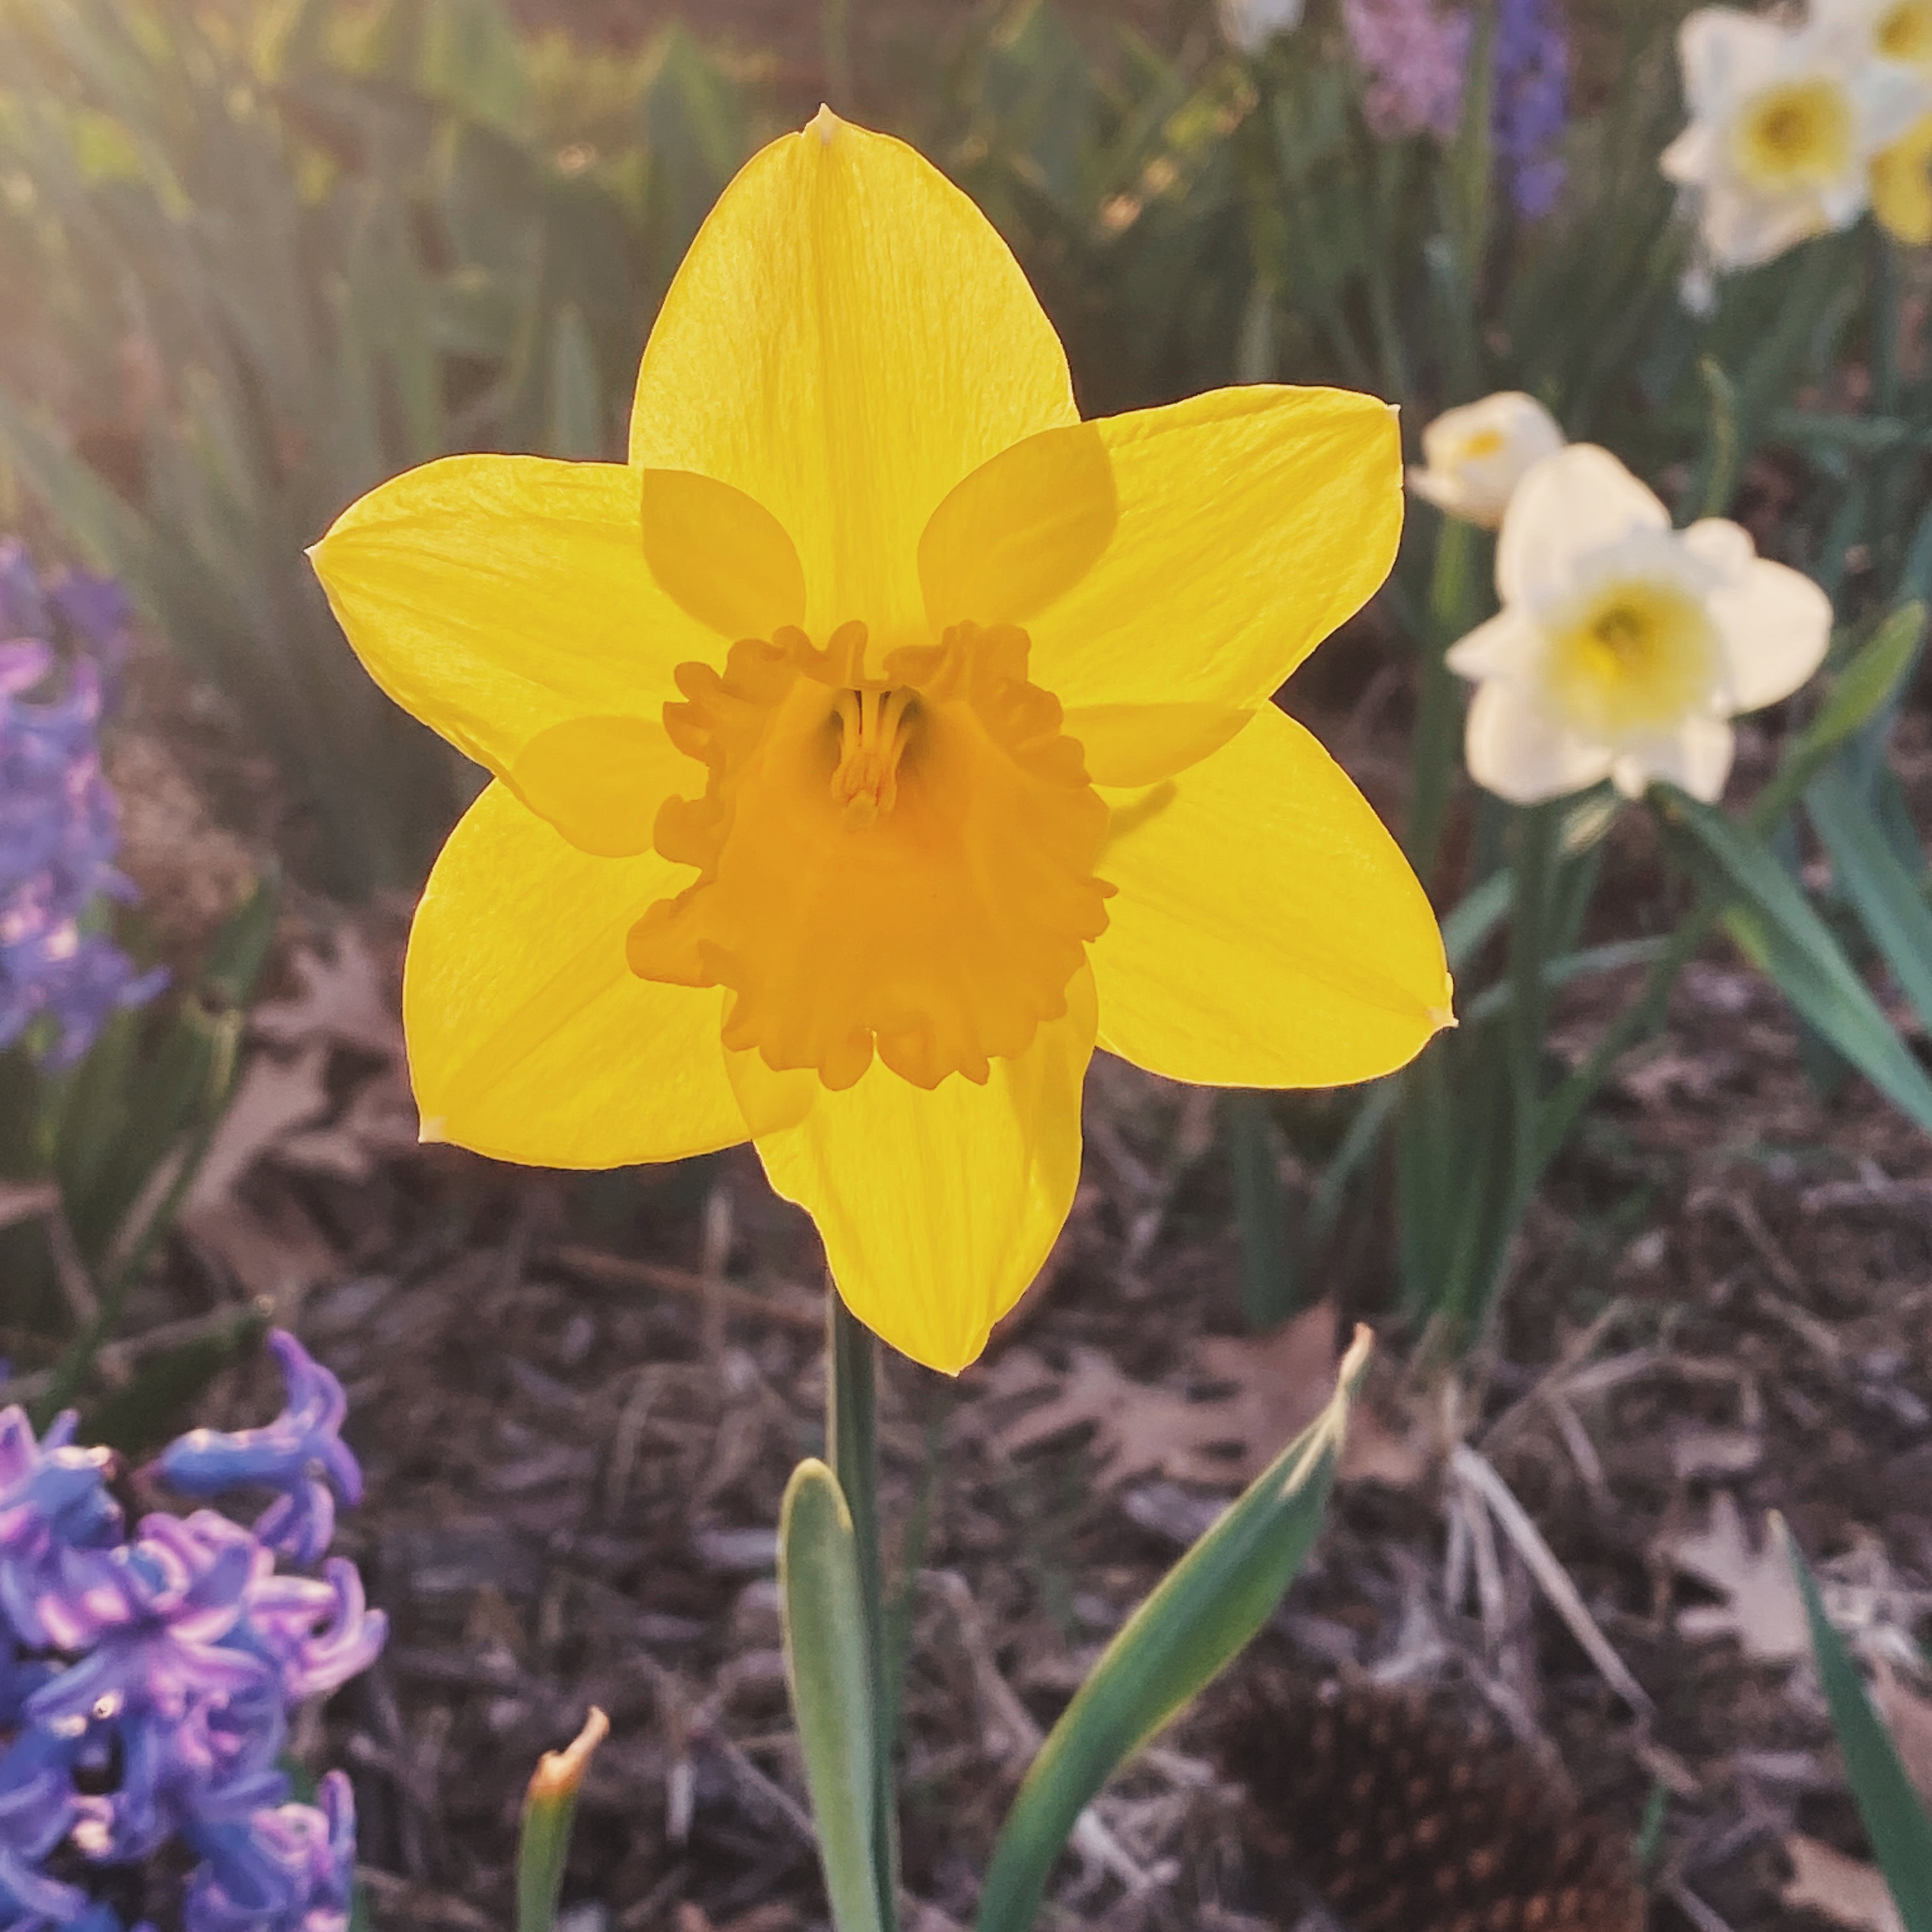 a daffodil with yellow petals and a yellow center